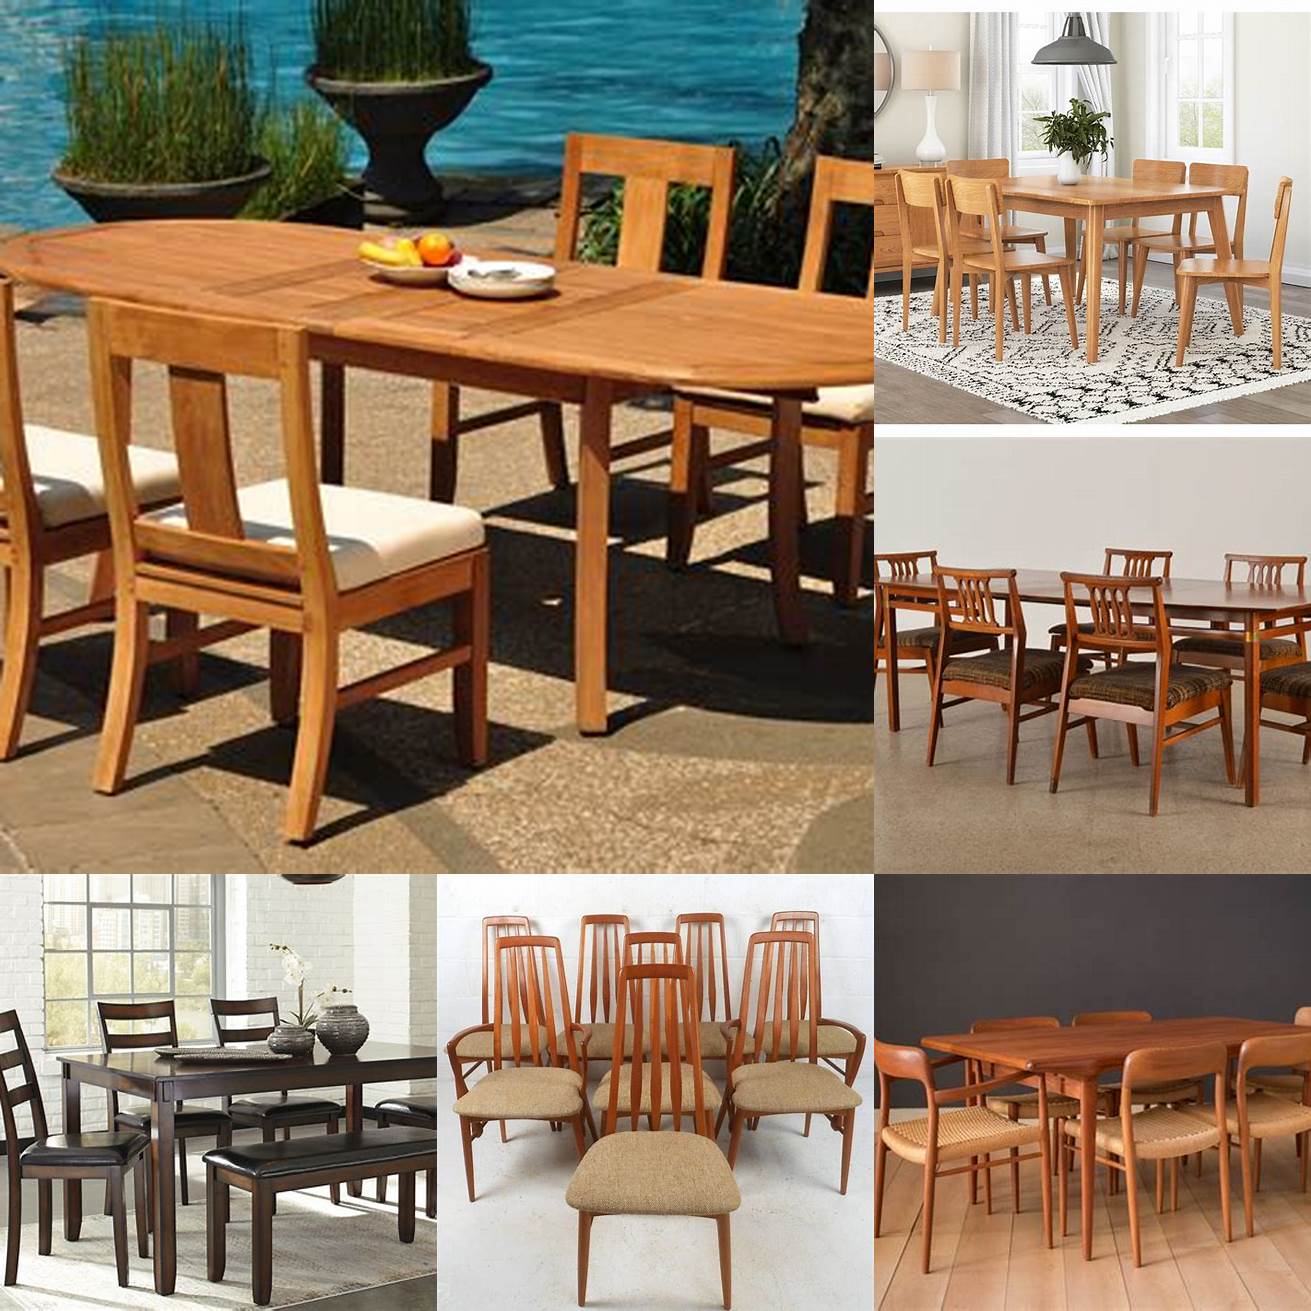 Teak Dining Room Sets with Benches